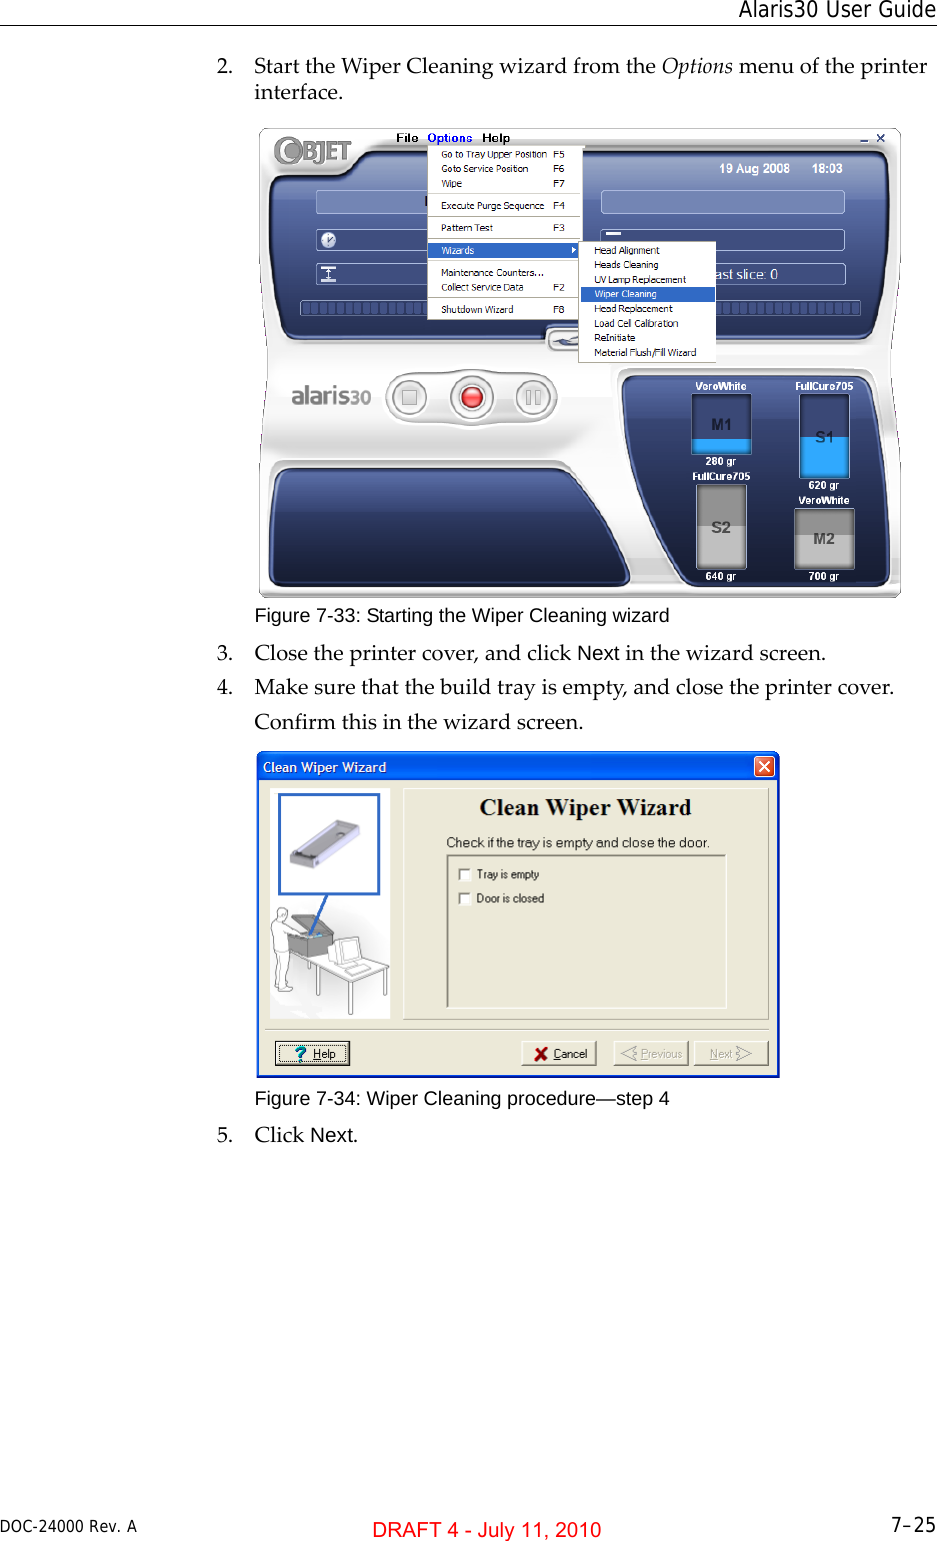 DOC-24000 Rev. A 7–25Alaris30 User Guide2. StarttheWiperCleaningwizardfromtheOptionsmenuoftheprinterinterface.Figure 7-33: Starting the Wiper Cleaning wizard3. Closetheprintercover,andclickNextinthewizardscreen.4. Makesurethatthebuildtrayisempty,andclosetheprintercover.Confirmthisinthewizardscreen.Figure 7-34: Wiper Cleaning procedure—step 45. ClickNext.DRAFT 4 - July 11, 2010